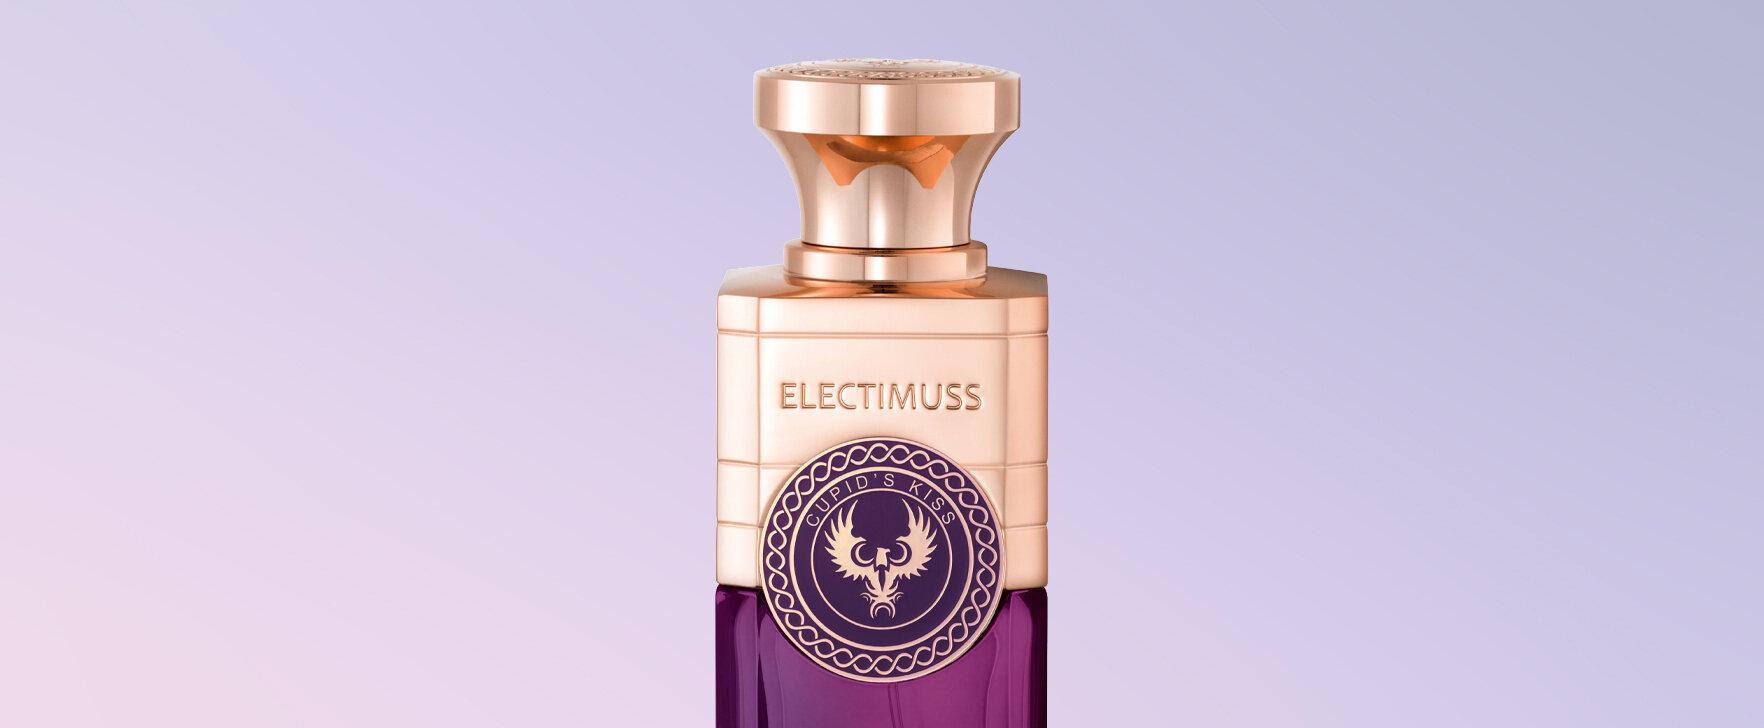 An Ode to the Diversity of Love: The New Perfume Cupid's Kiss by Electimuss